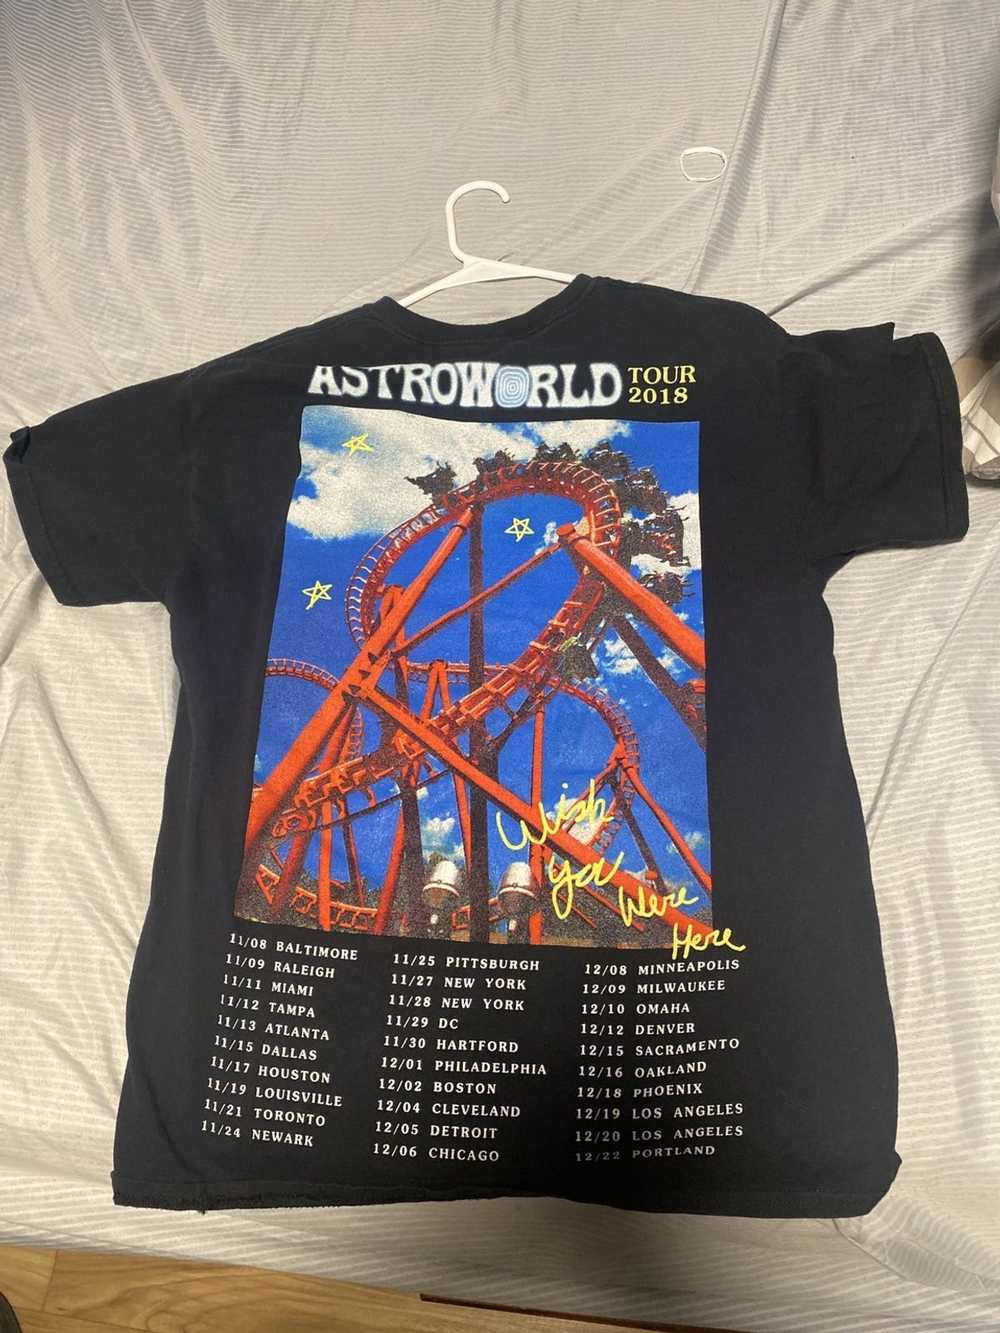 Band Tees 2018 Astrosfest Tour T shirt - image 2